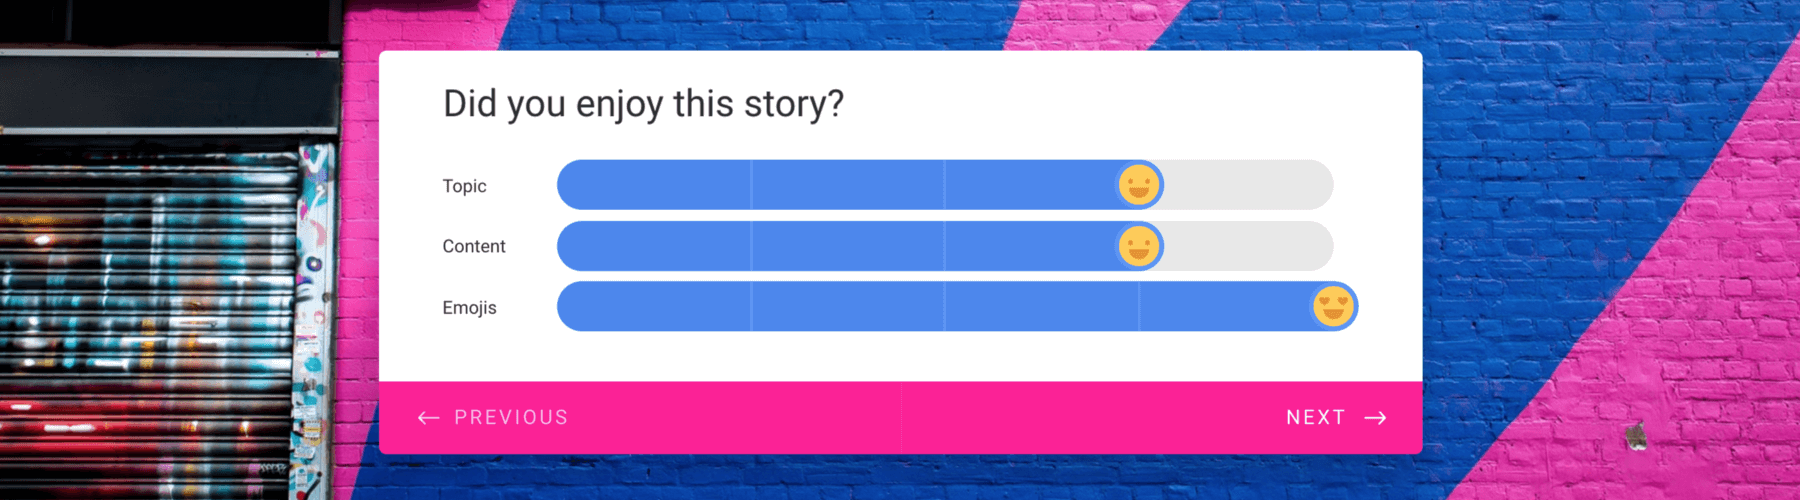 Beyond Likert scales: how we made boring form-filling more fun